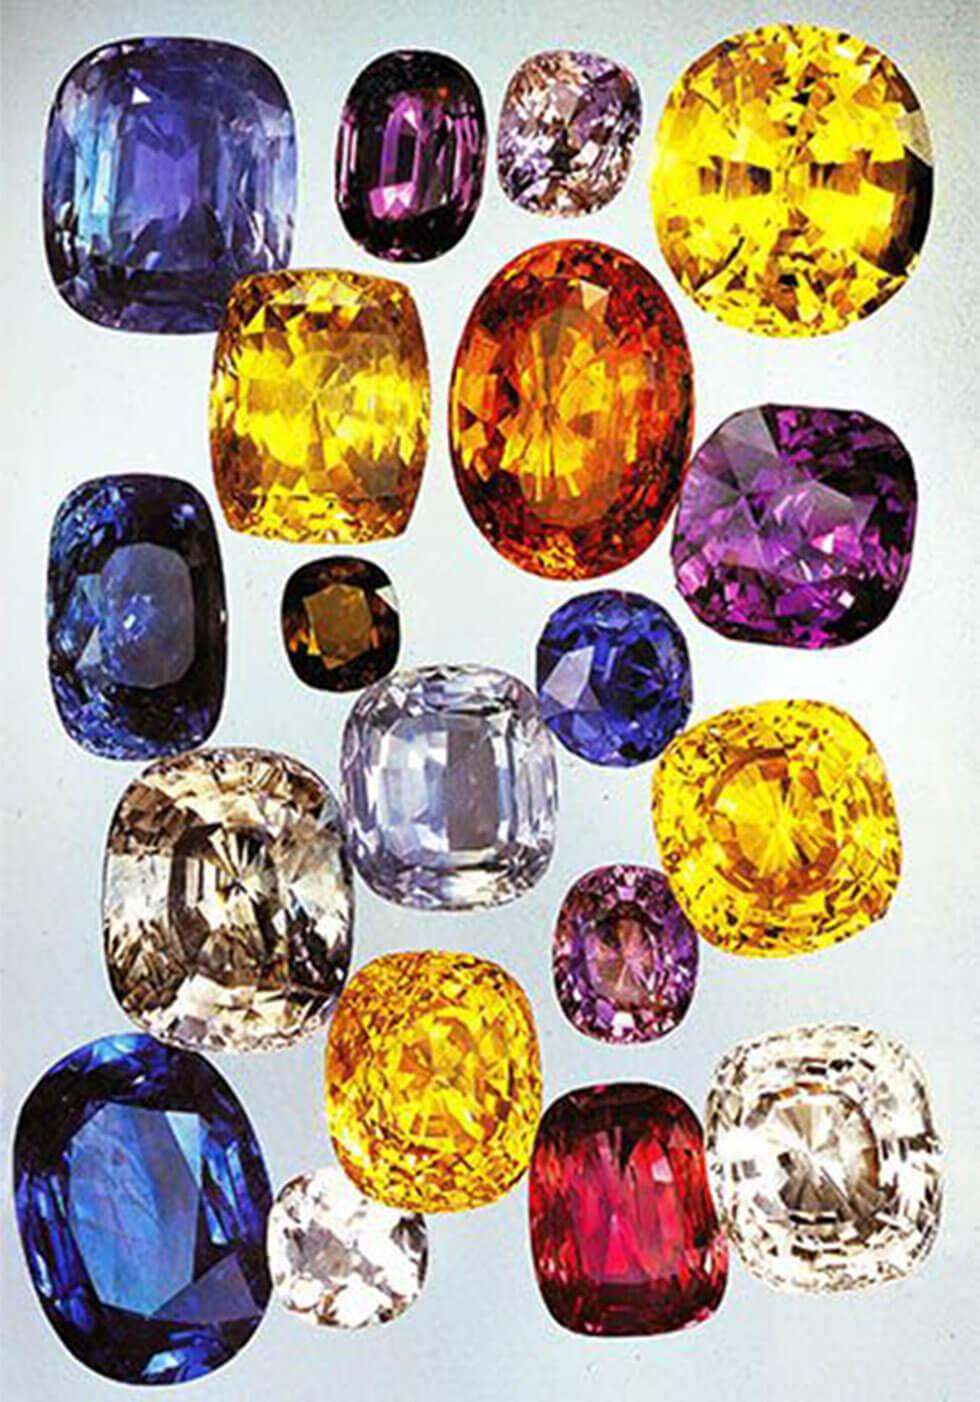 Colourful jewels including sapphire, white diamond, ruby, amethyst, amber, citrine